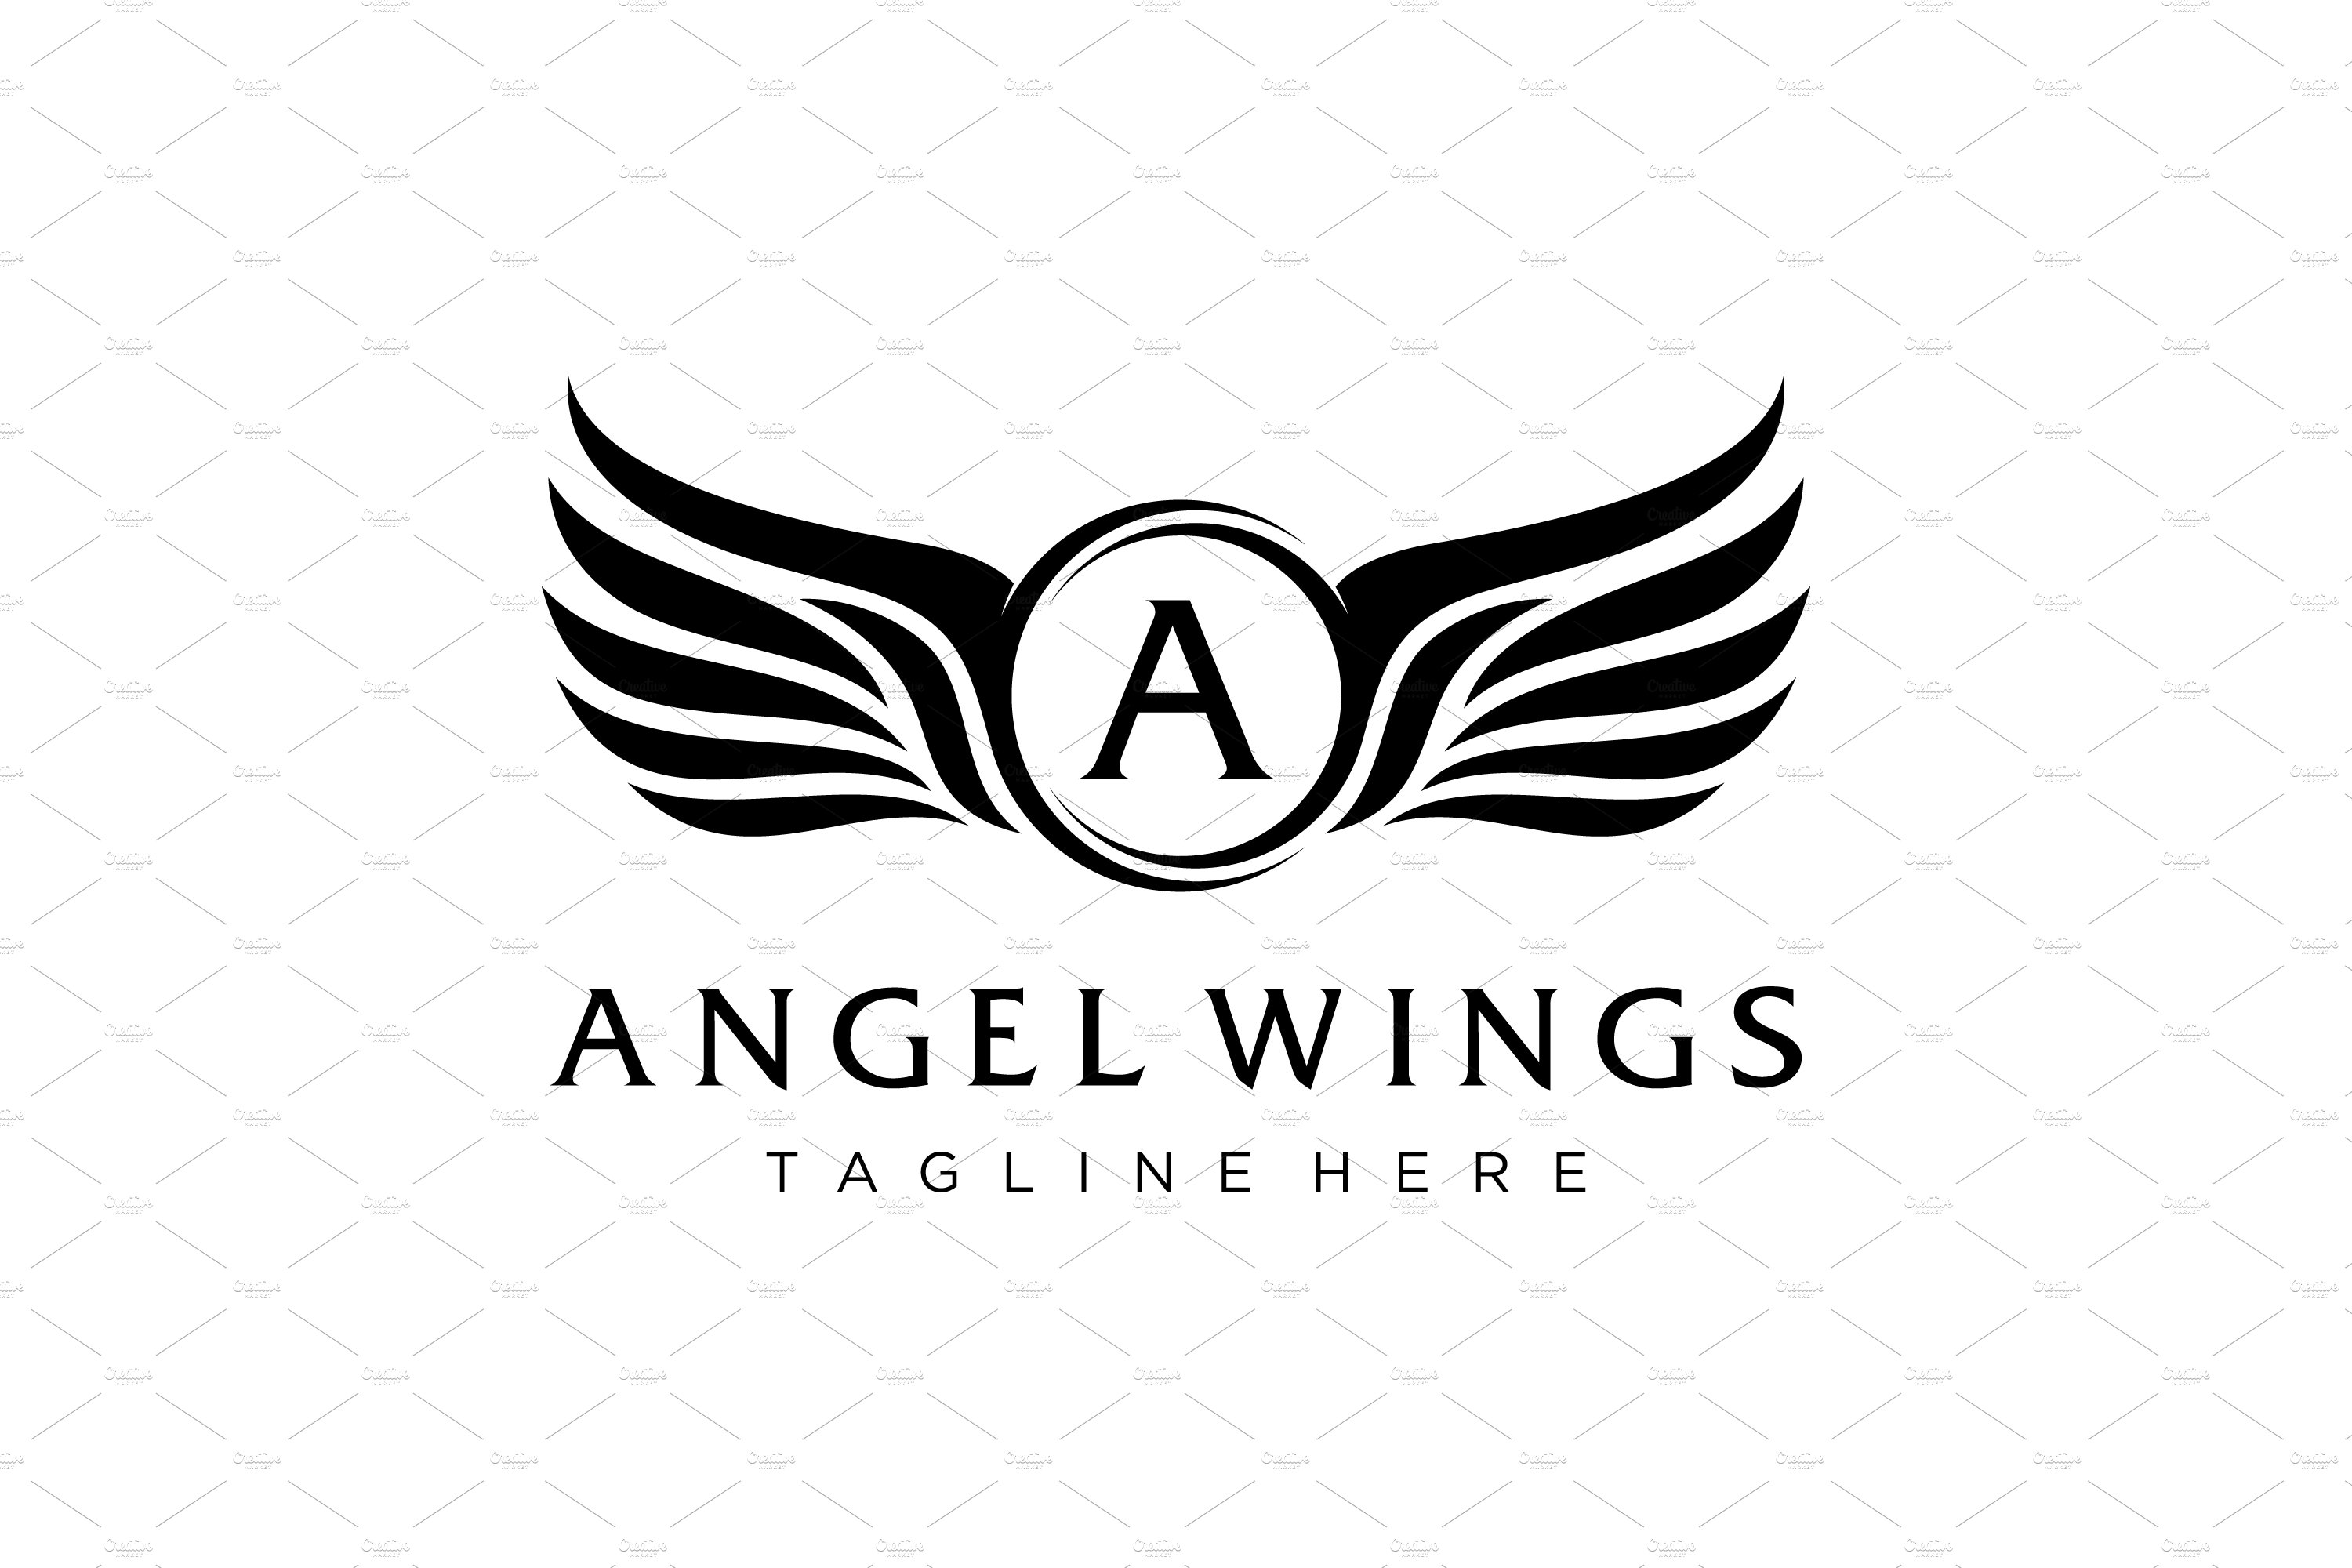 Angel Wings Logo cover image.